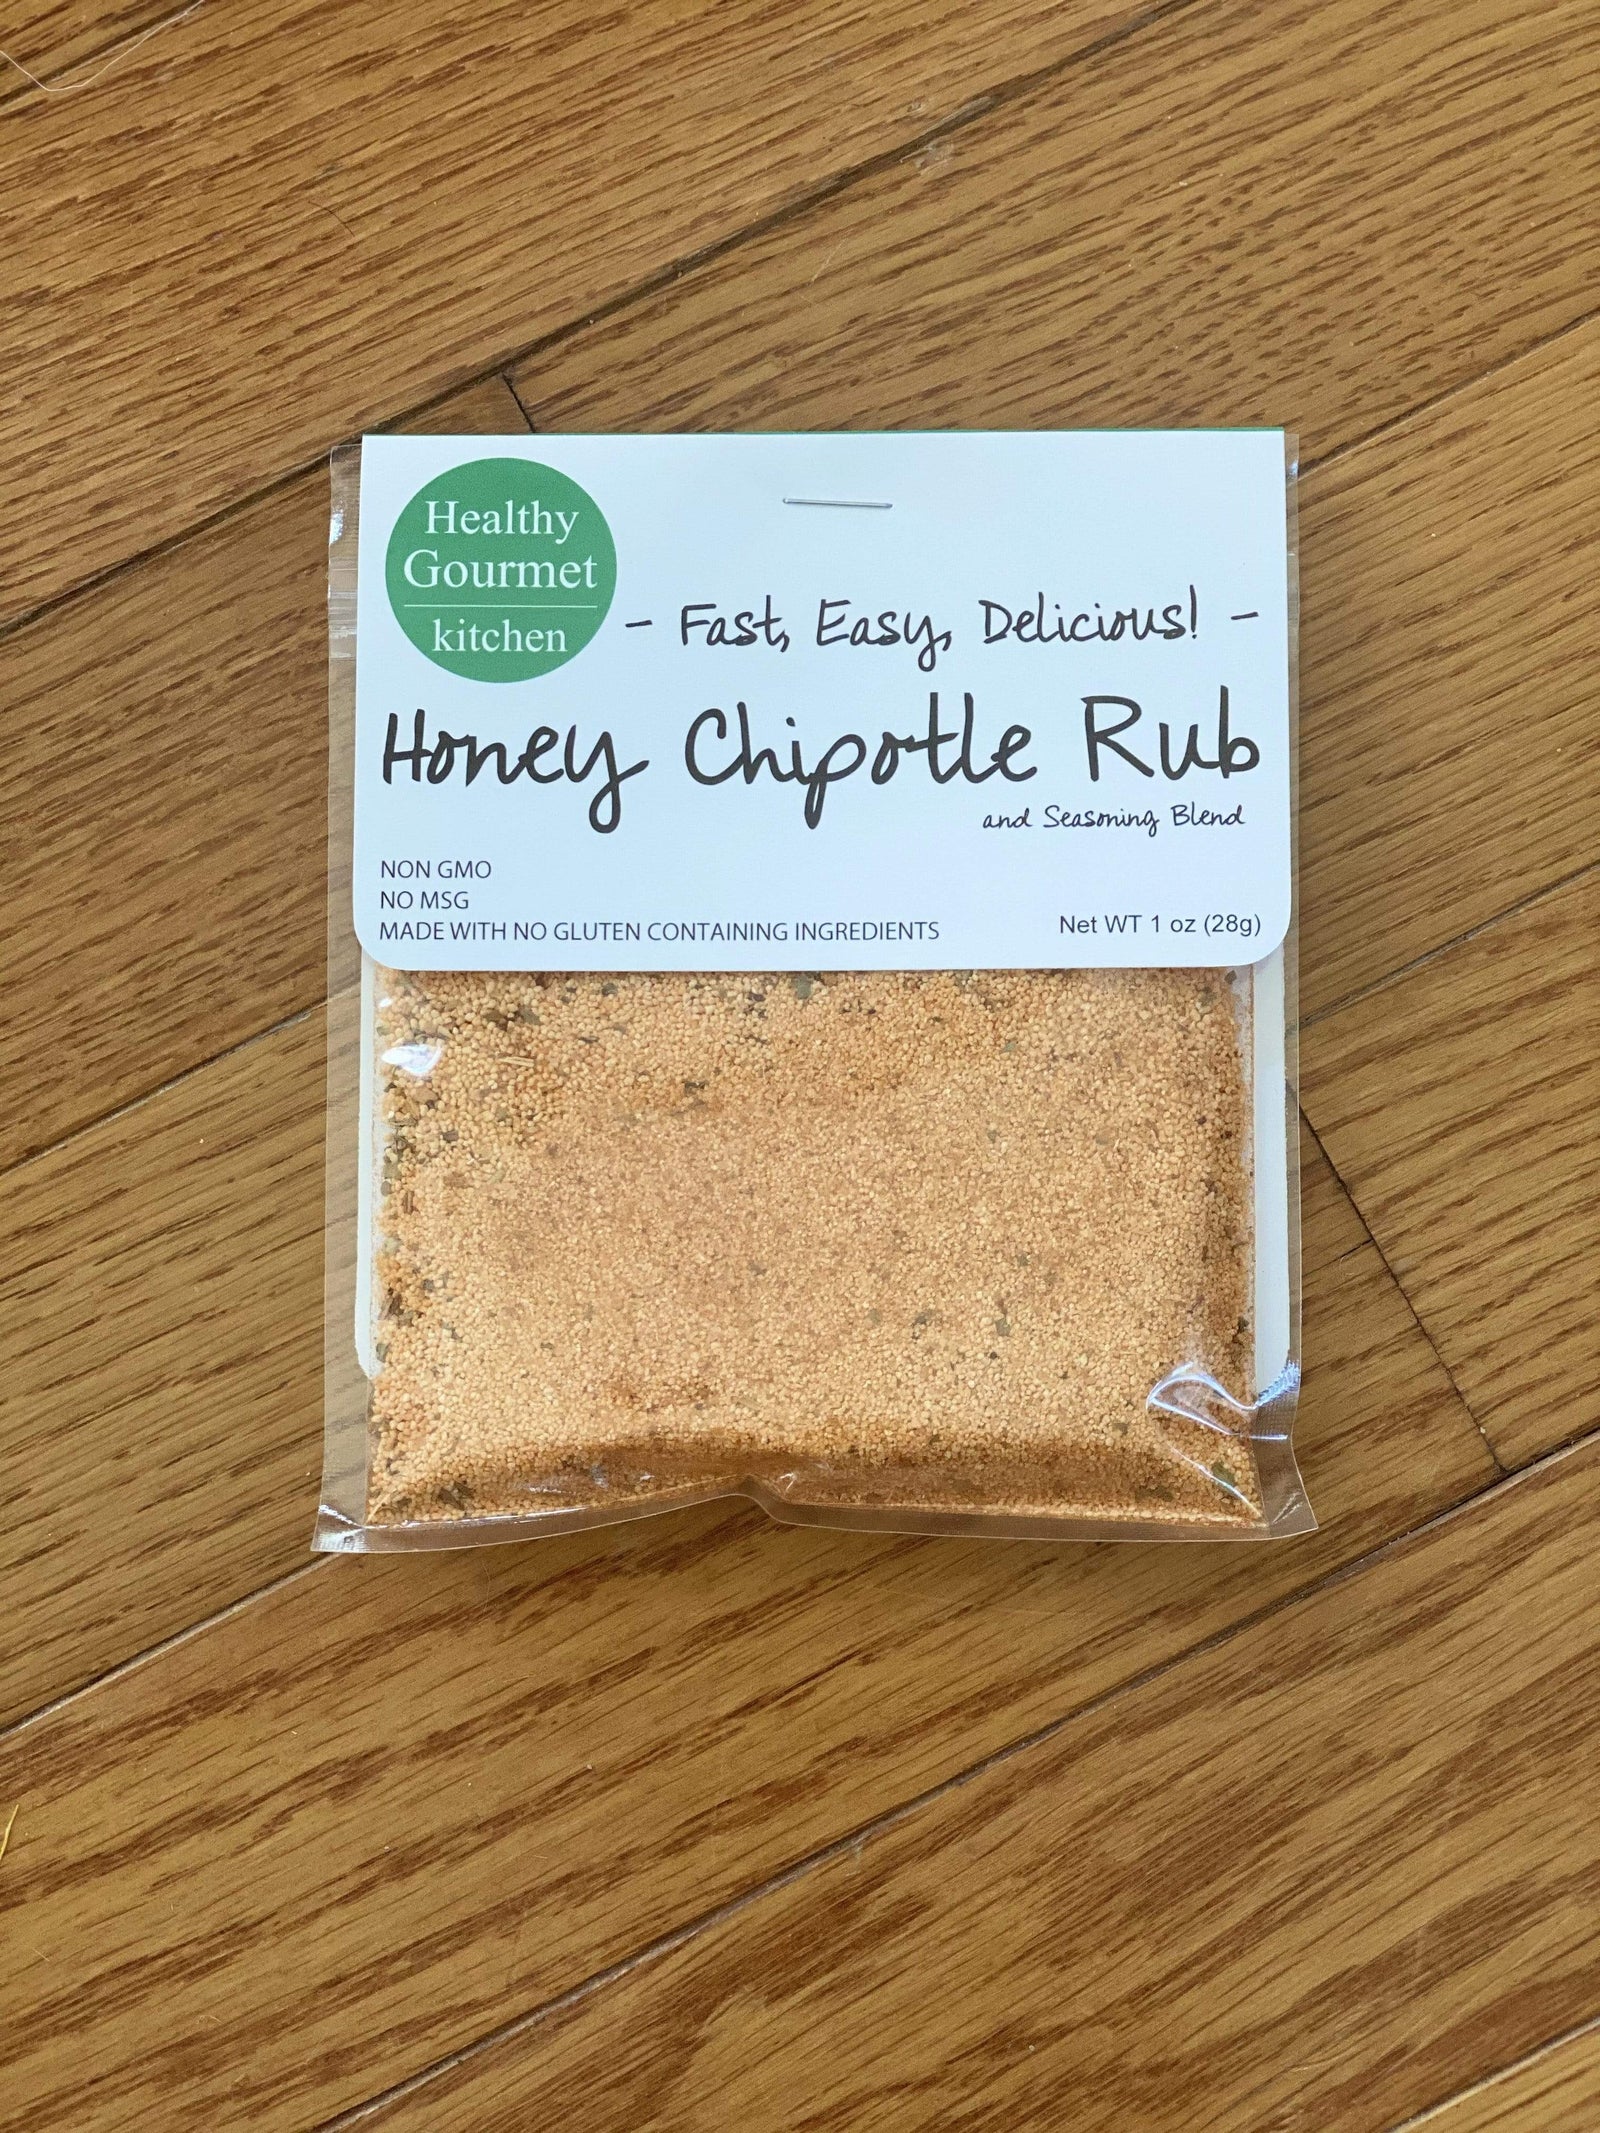 Barbecue Honey Chipotle Rub Herbs for Meat & Veggies